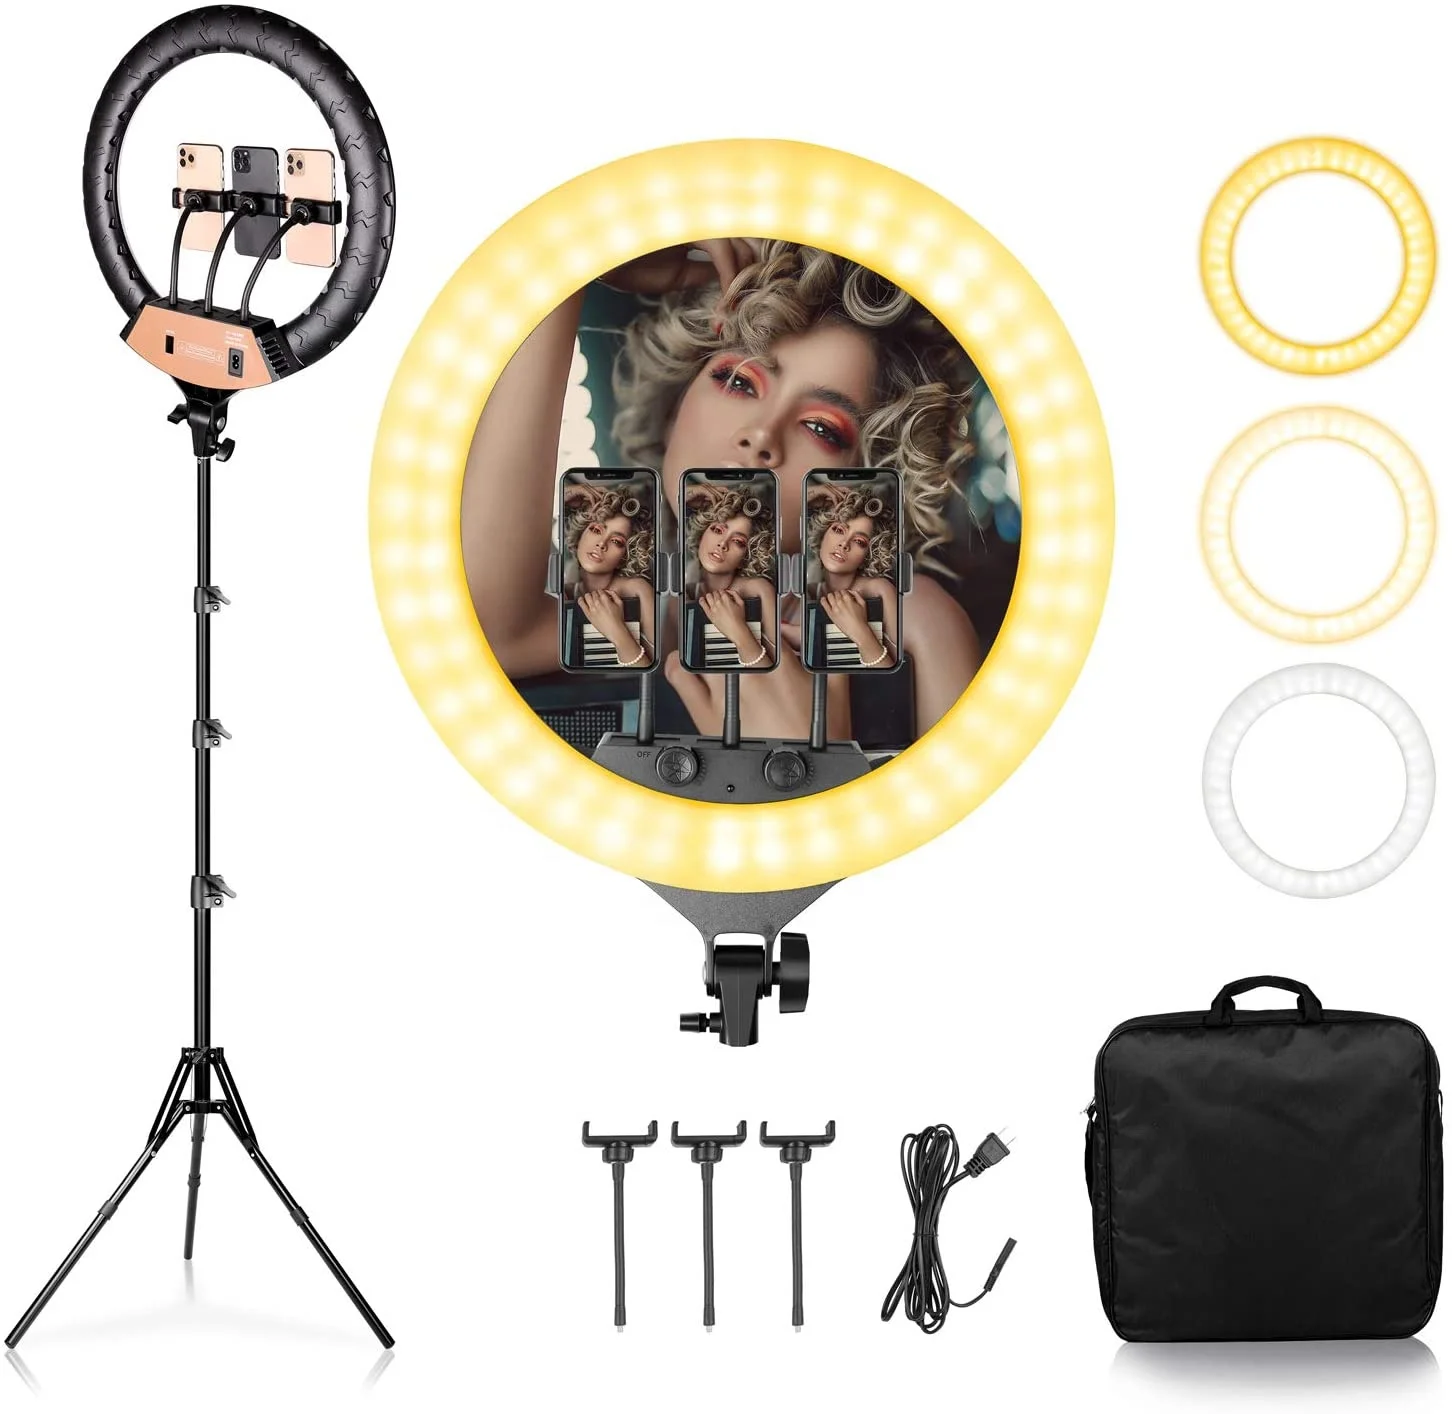 

18 Inch LED Dimmable Selfie Ring light, 45cm Photography Lamp For Youtube Live Makeup Video with Tripod Phone Holder